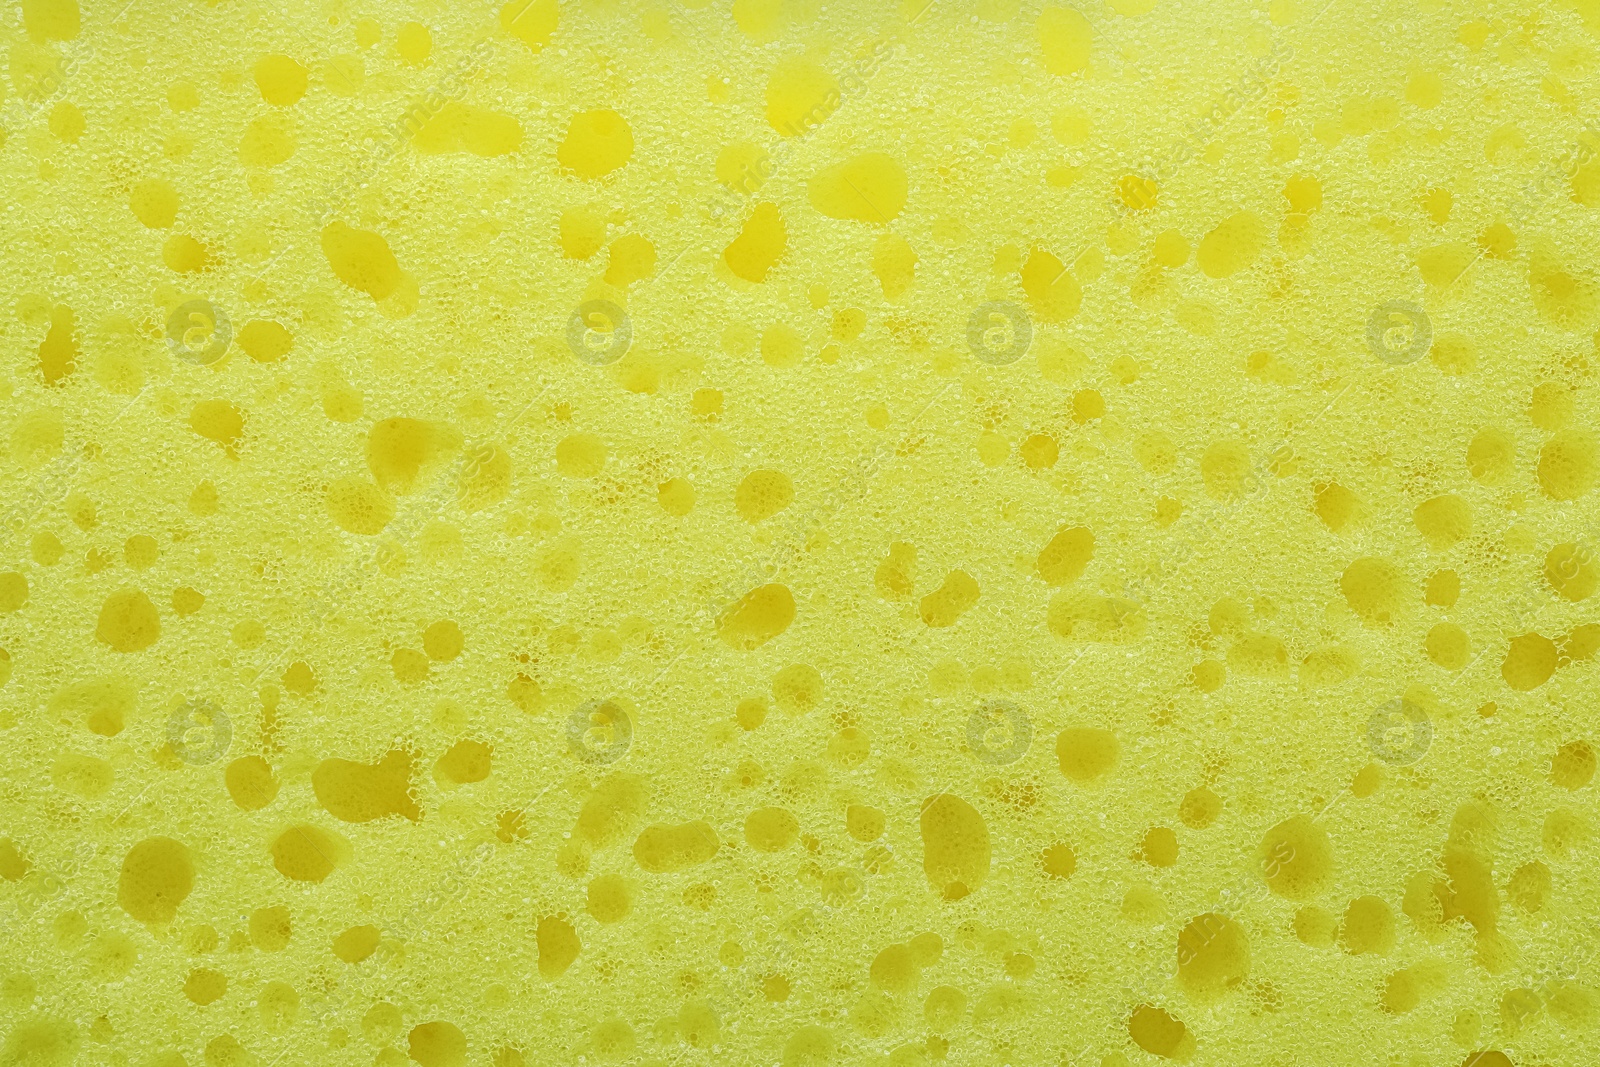 Photo of New yellow sponge as background, closeup view